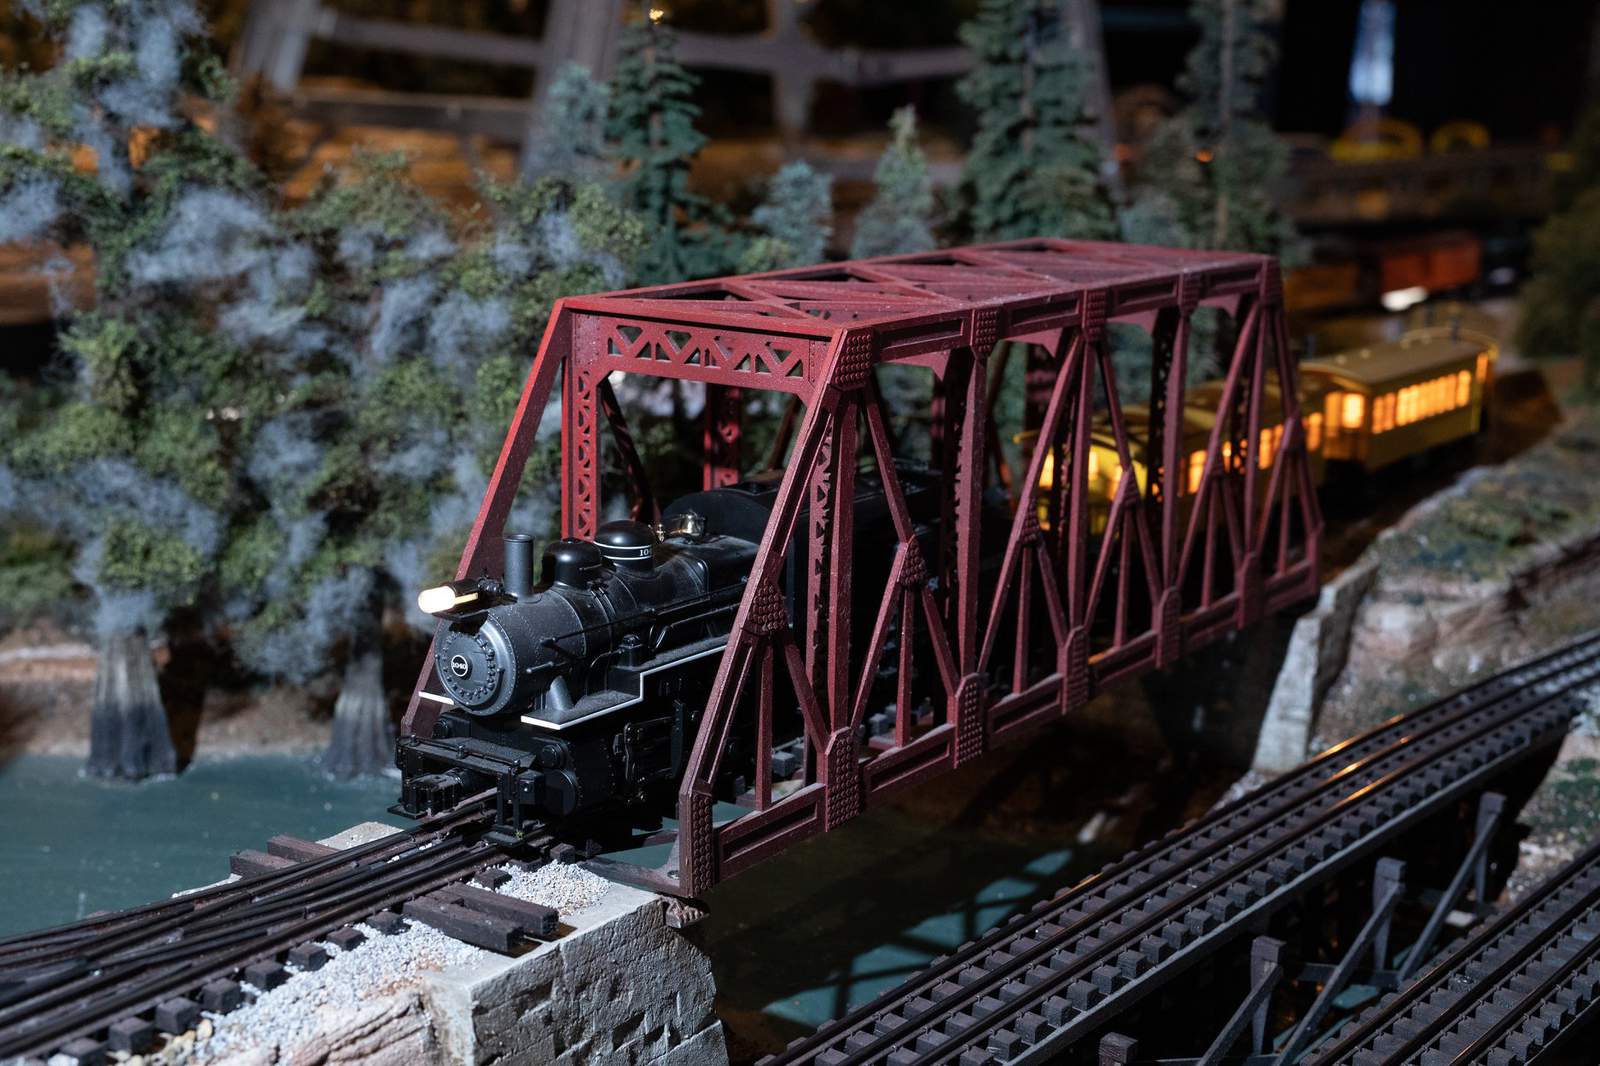 All aboard! Massive model-train display chugging back to Houston Museum of Natural Science just in time for the holidays